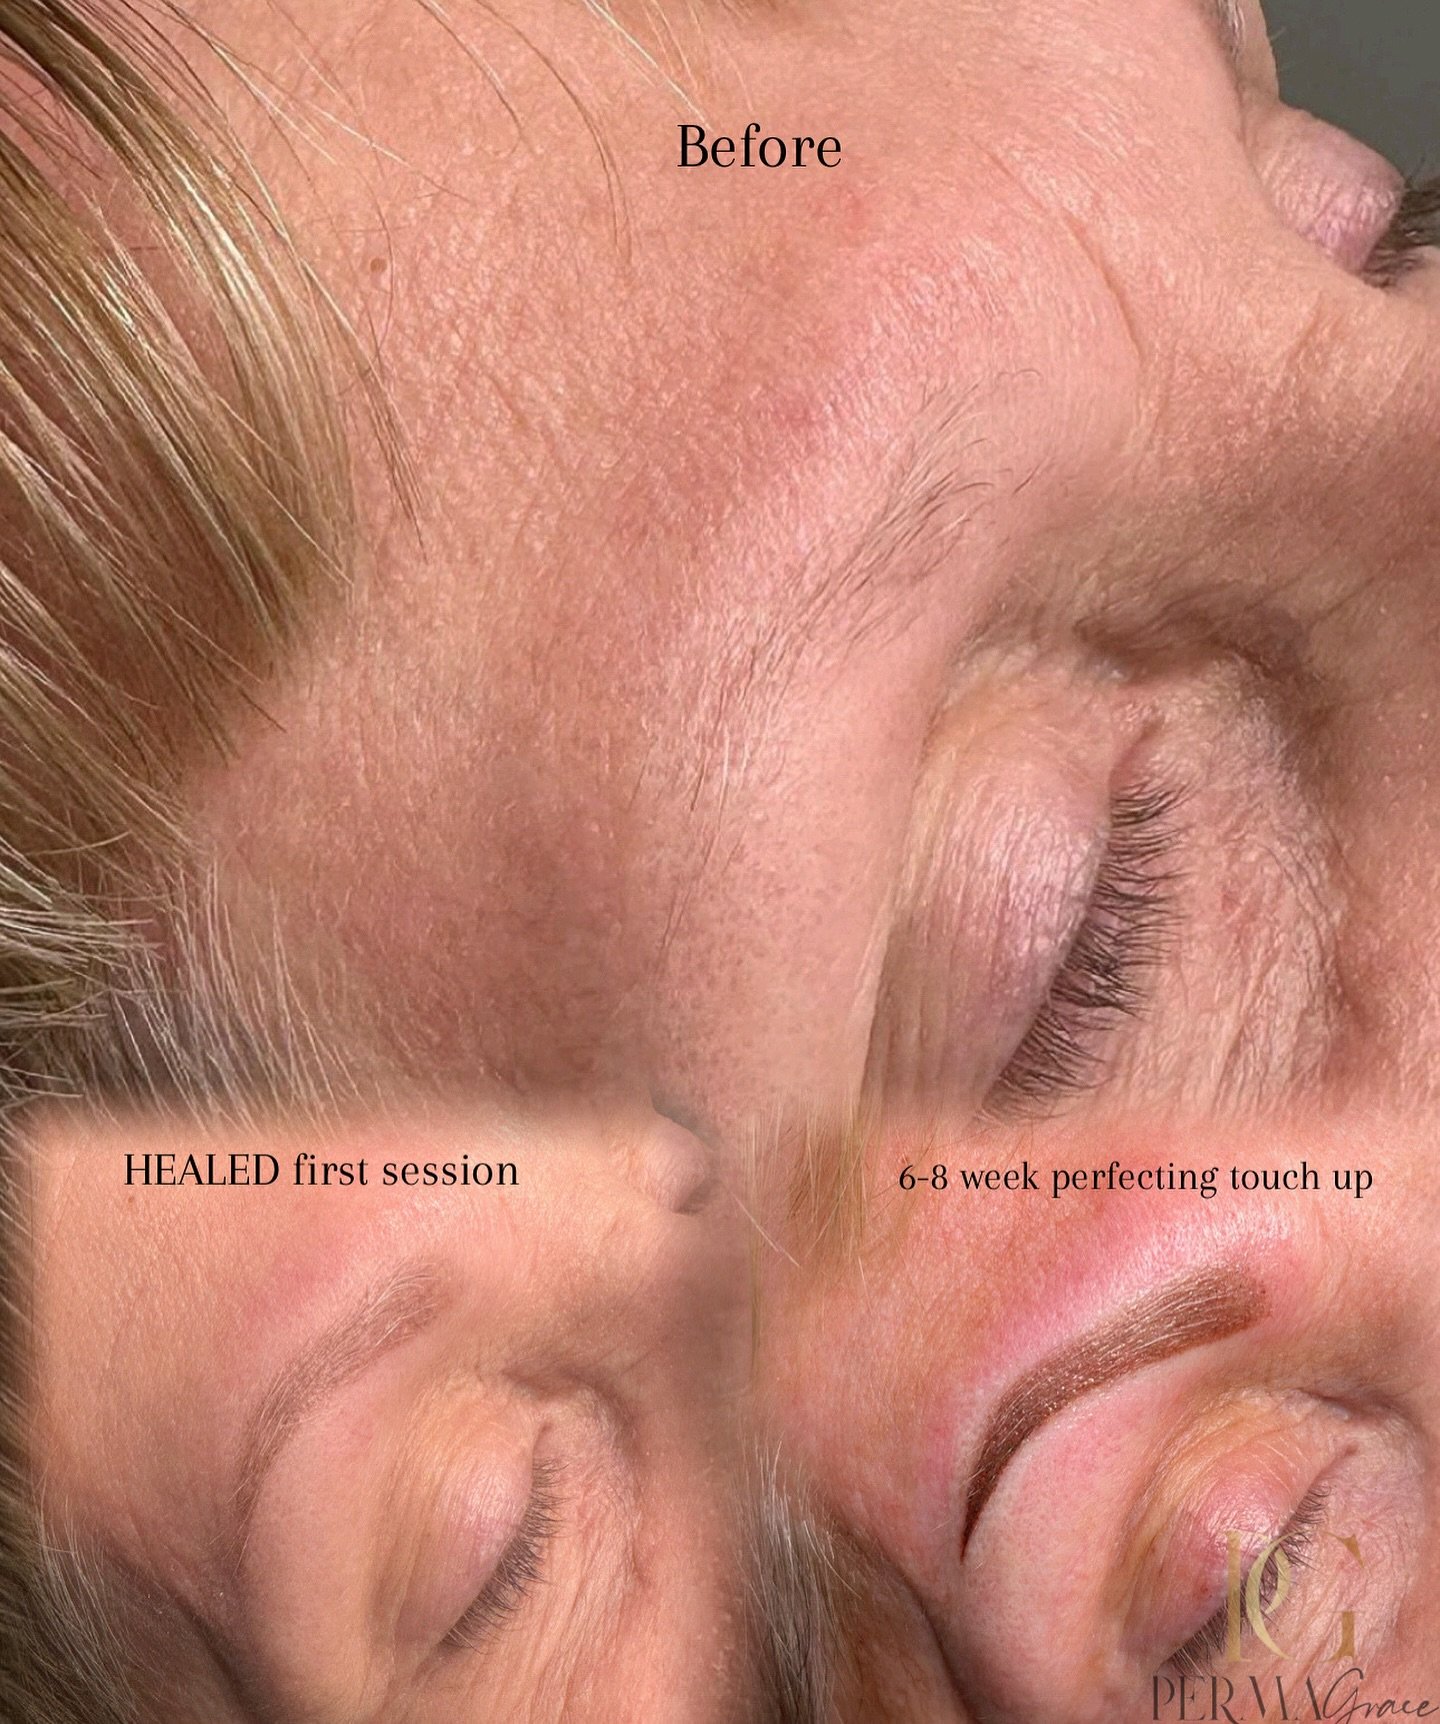 The before, first session, and 6-8 week perfecting touch up. Raw results🙌🏼 With permanent makeup it is always mandatory to have two sessions. Here are some reasons why👇🏼
- The pigments in permanent makeup are not as concentrated as compared to ge